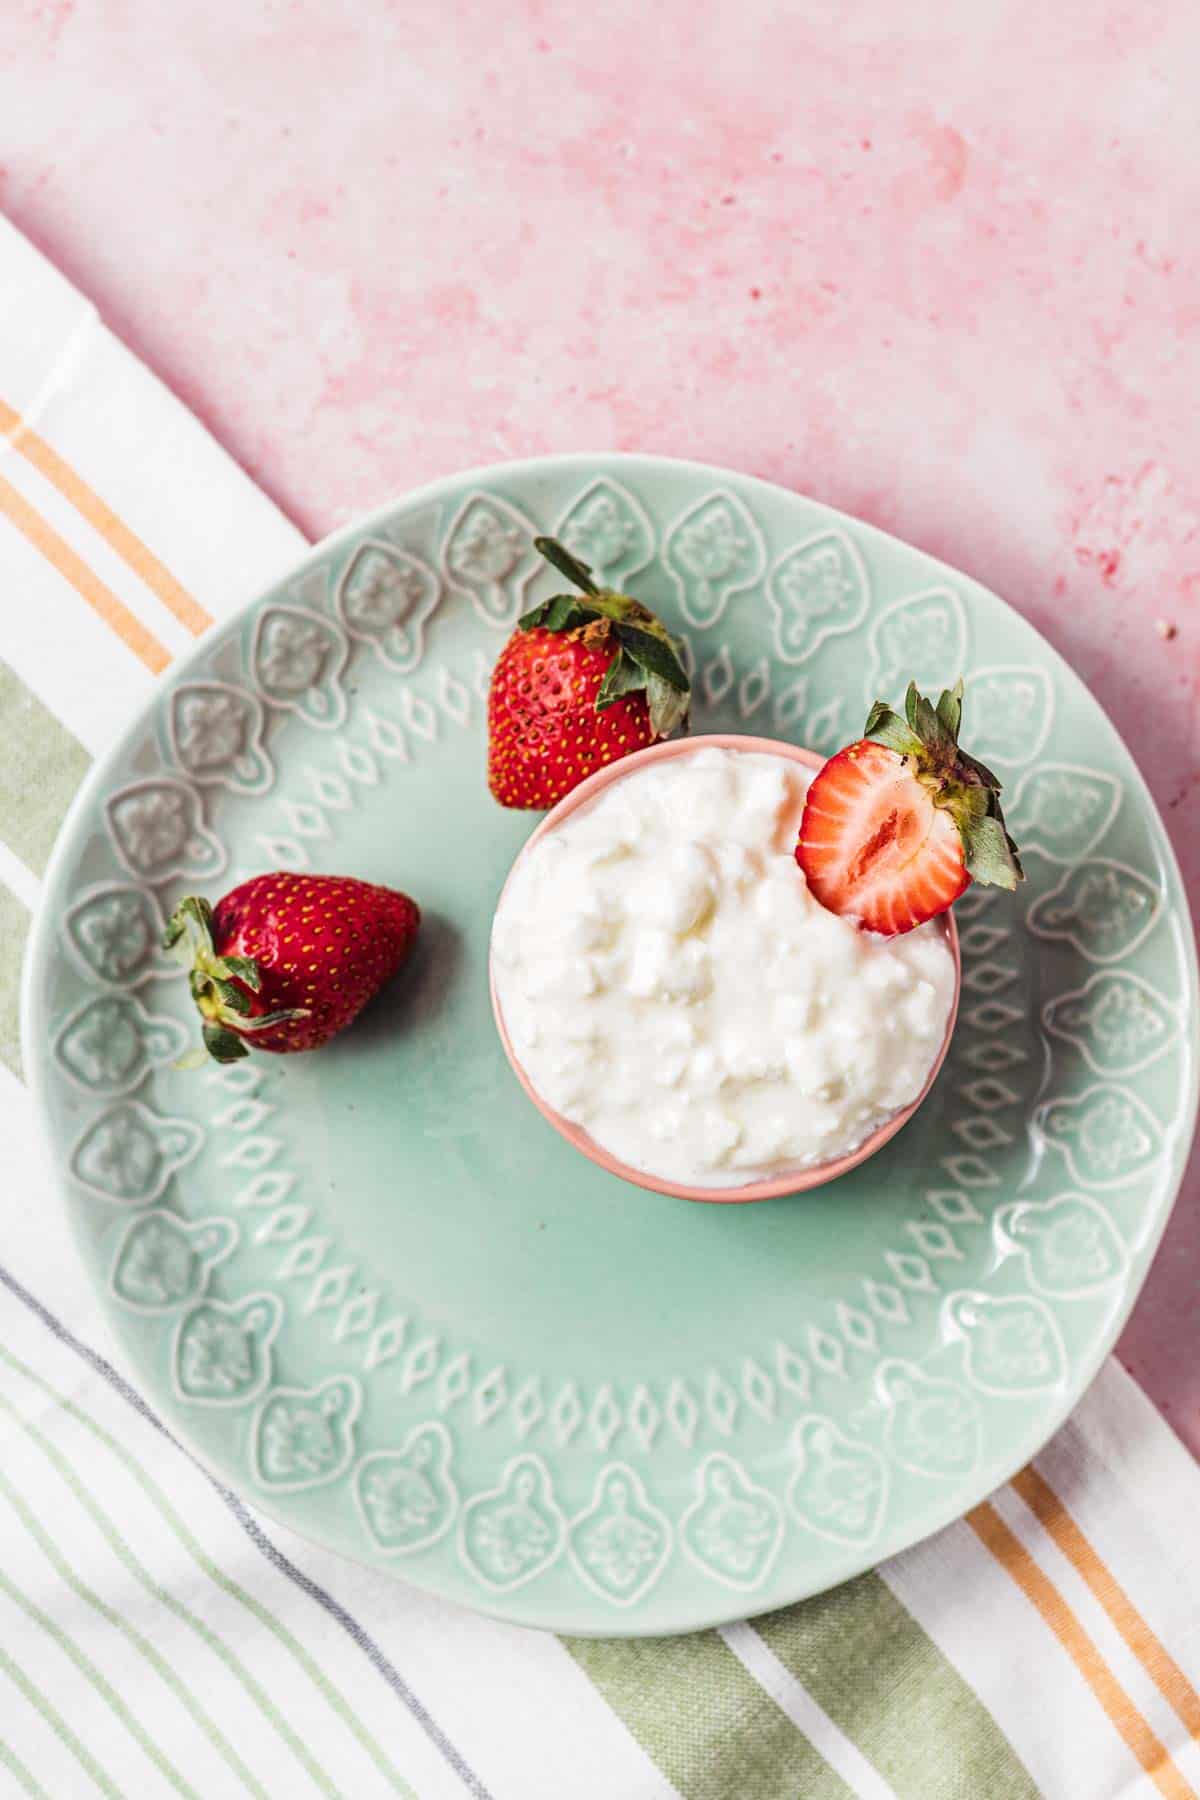 Birds eye view of cottage cheese portioned in a small bowl on a green plate with strawberries on the side.